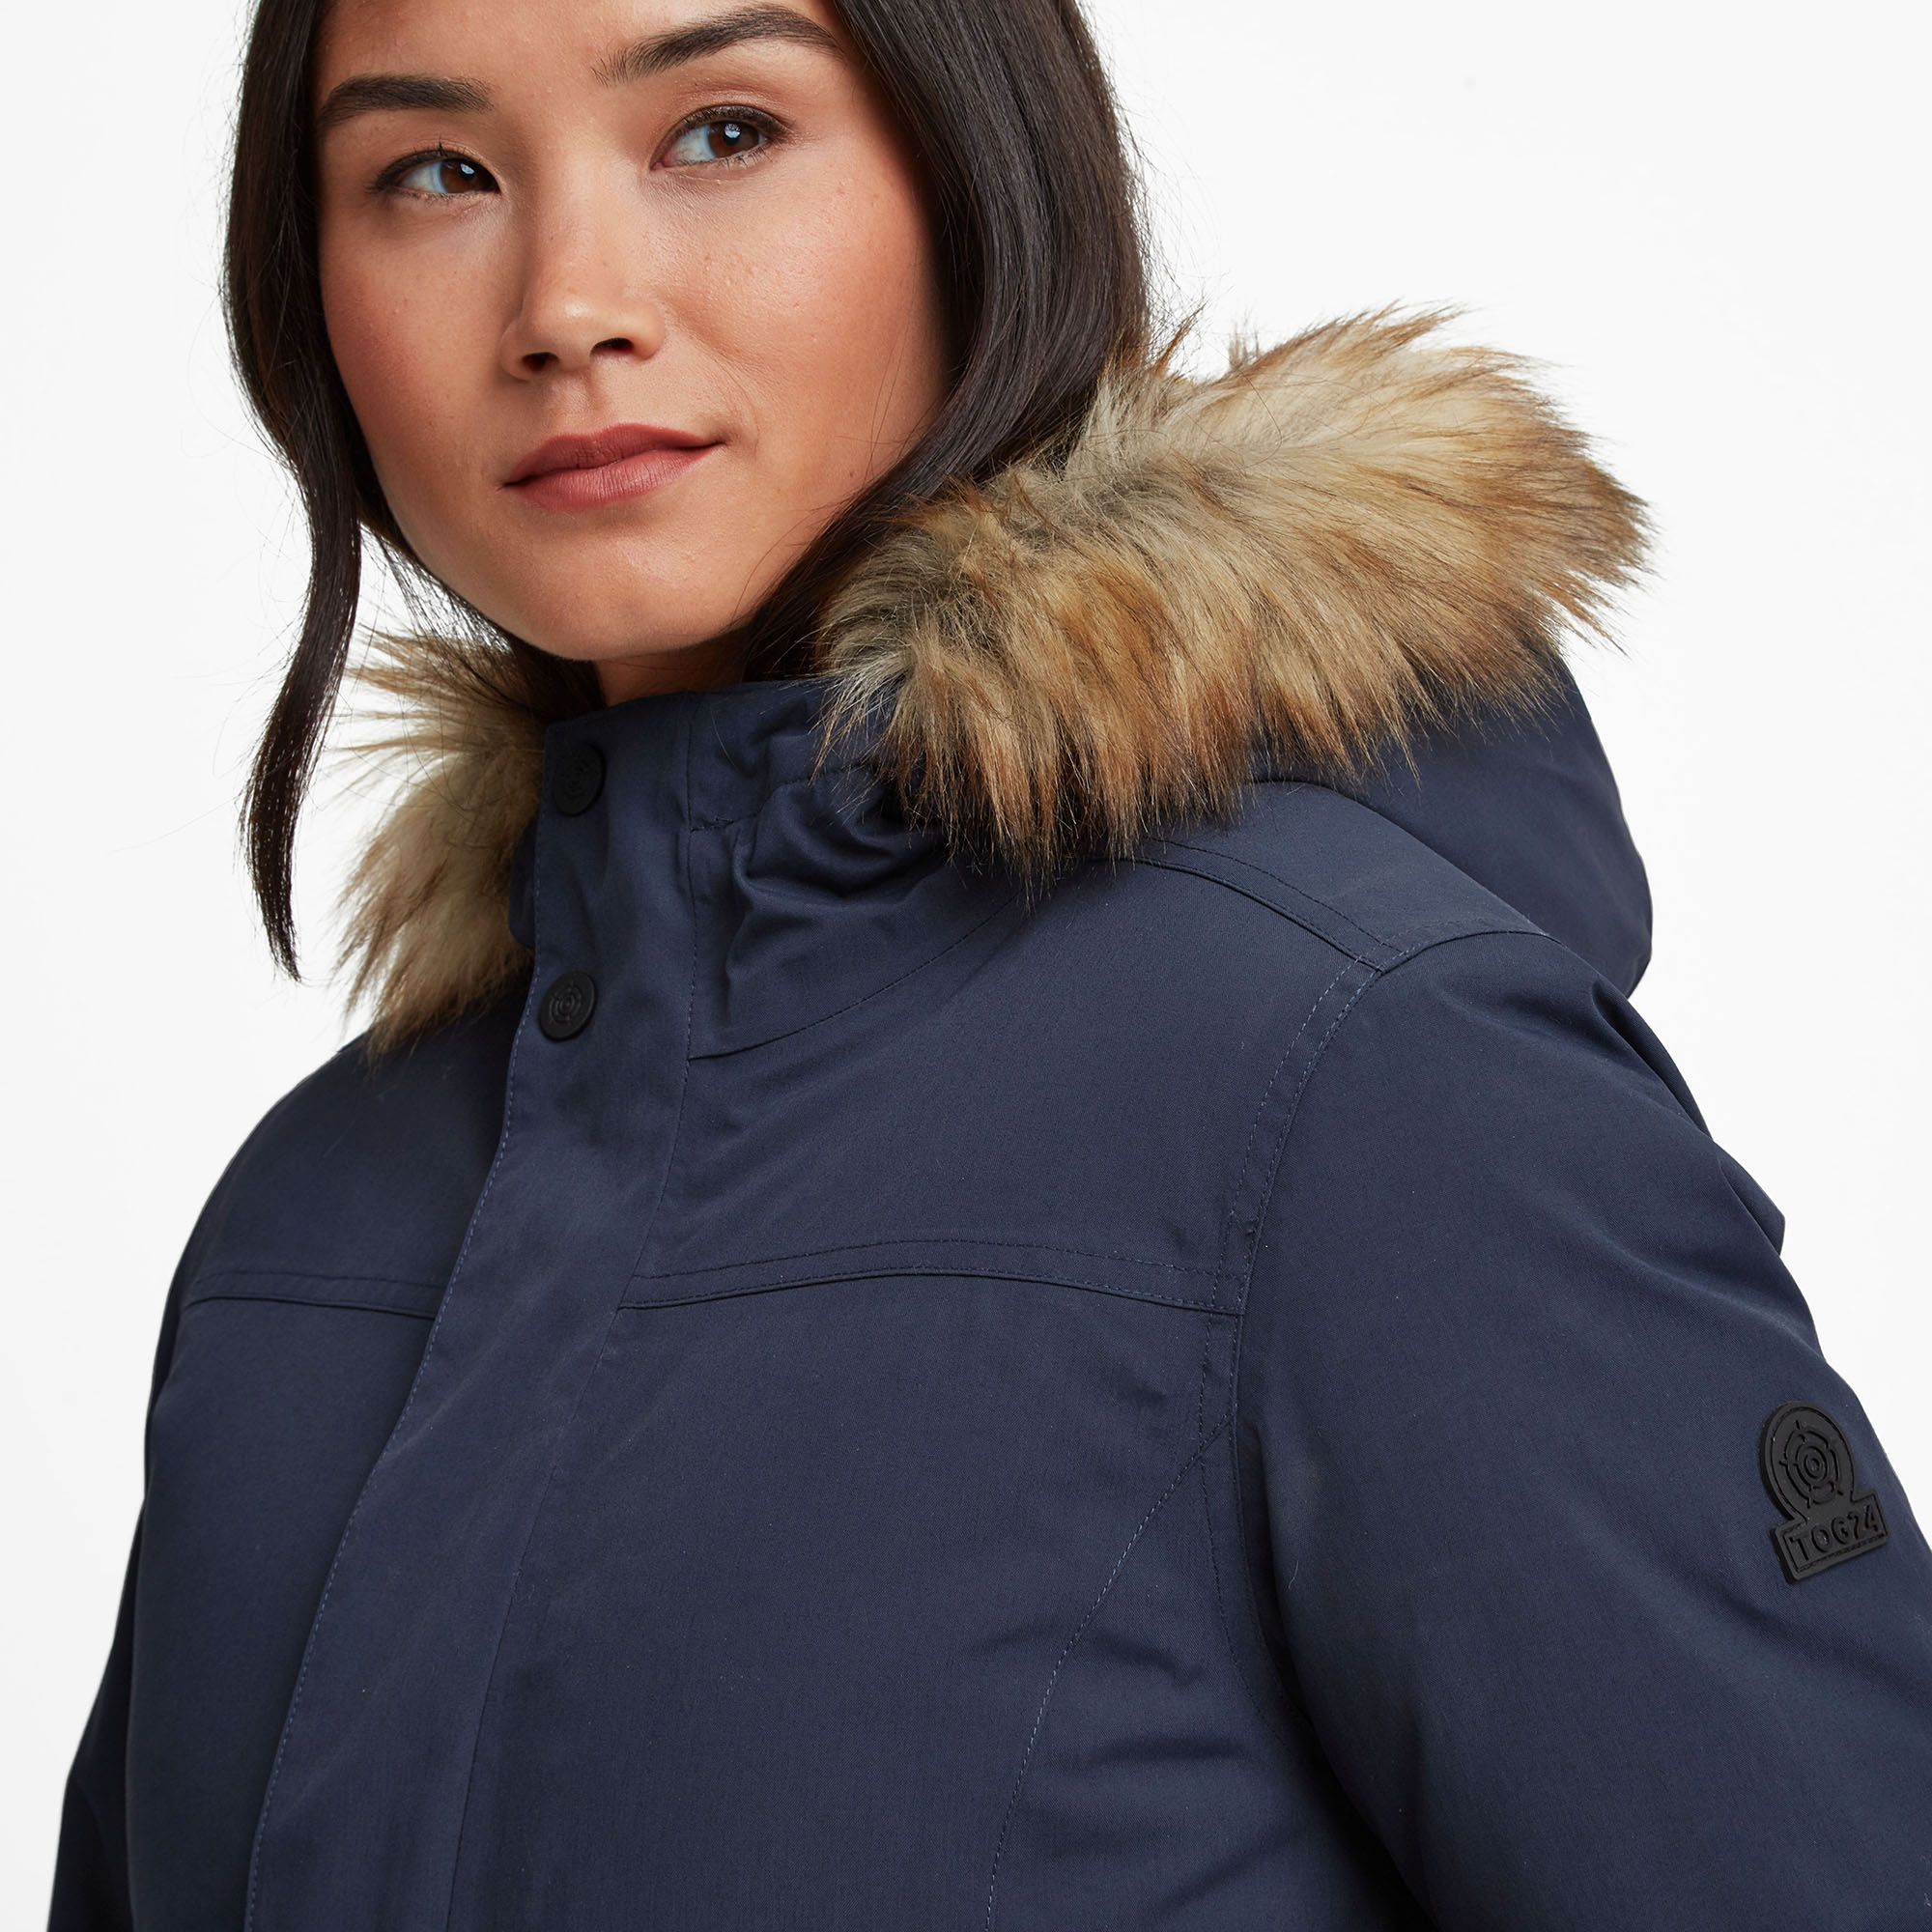 Super warm, waterproof and windproof, yet fully breathable, our Alderidge winter parka coat is timeless and cut to flatter. The hard-wearing outer layer has a smooth, matt finish that has all the good looks of casual cotton twill and an extra water repellent coating to see off showers. The taffeta lining feels silky against the skin and the insulating filling will keep you toasty warm. The cosy hood is armed with a handy Velcro adjuster and trimmed with removable and beautifully soft faux-fur, so your ears and neck are protected from the chill. Our Yorkshire-based designers have also given plenty of thought to the finer styling details, so you'll appreciate adjustable drawcords to cinch your waist in and rounded seams that give a flattering streamlined look. The full-length zip is neatly secured with press studs and Velcro and opens at both ends, so you can get air in when needed and stretch your legs when you sit down. Perfect for walks across the moors or to wear as your everyday commuter coat, you'll love the brushed fleece lined patch pockets with side entry that double as cosy handwarmers. As a final mark of quality, our embossed rubber Yorkshire Rose badge is proudly displayed on the sleeve.